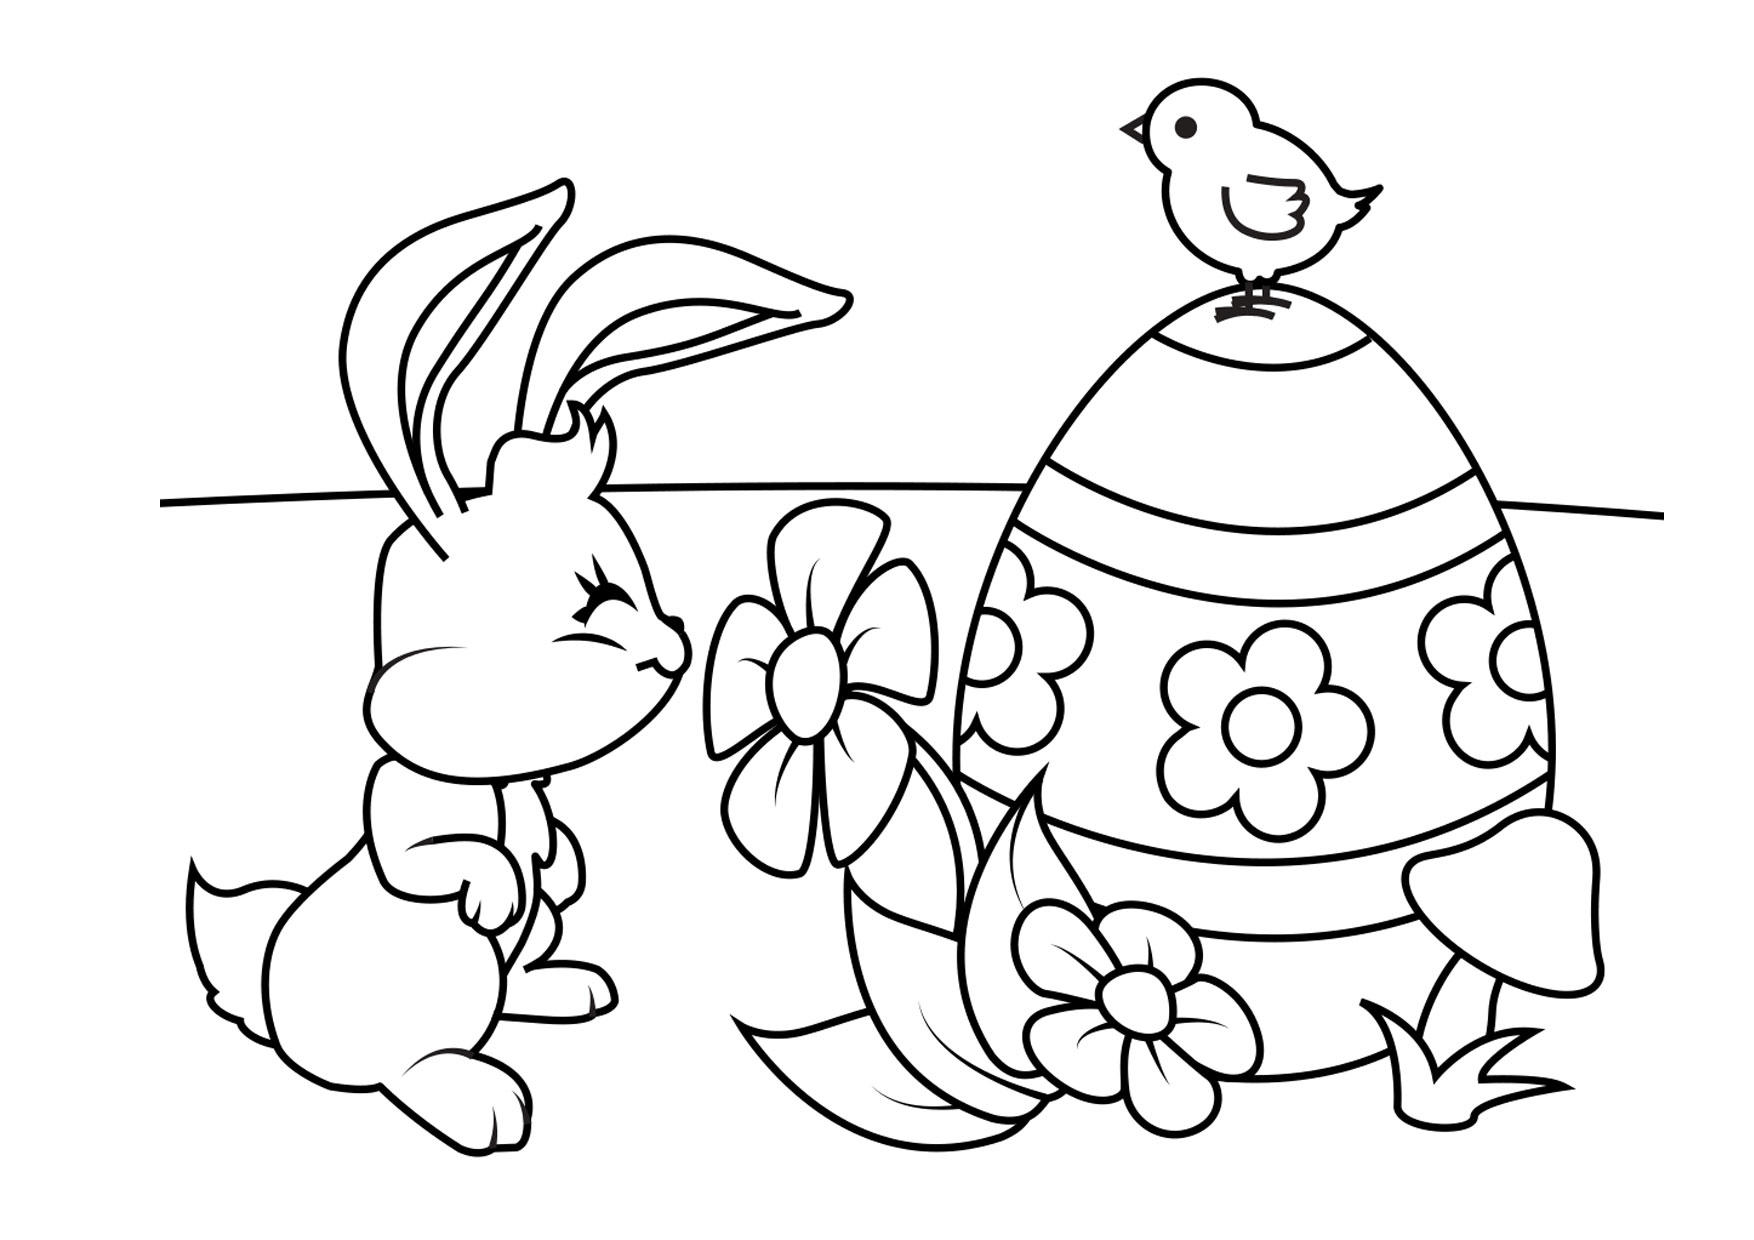 Coloring Page Easter bunny with Easter egg and chick   free ...